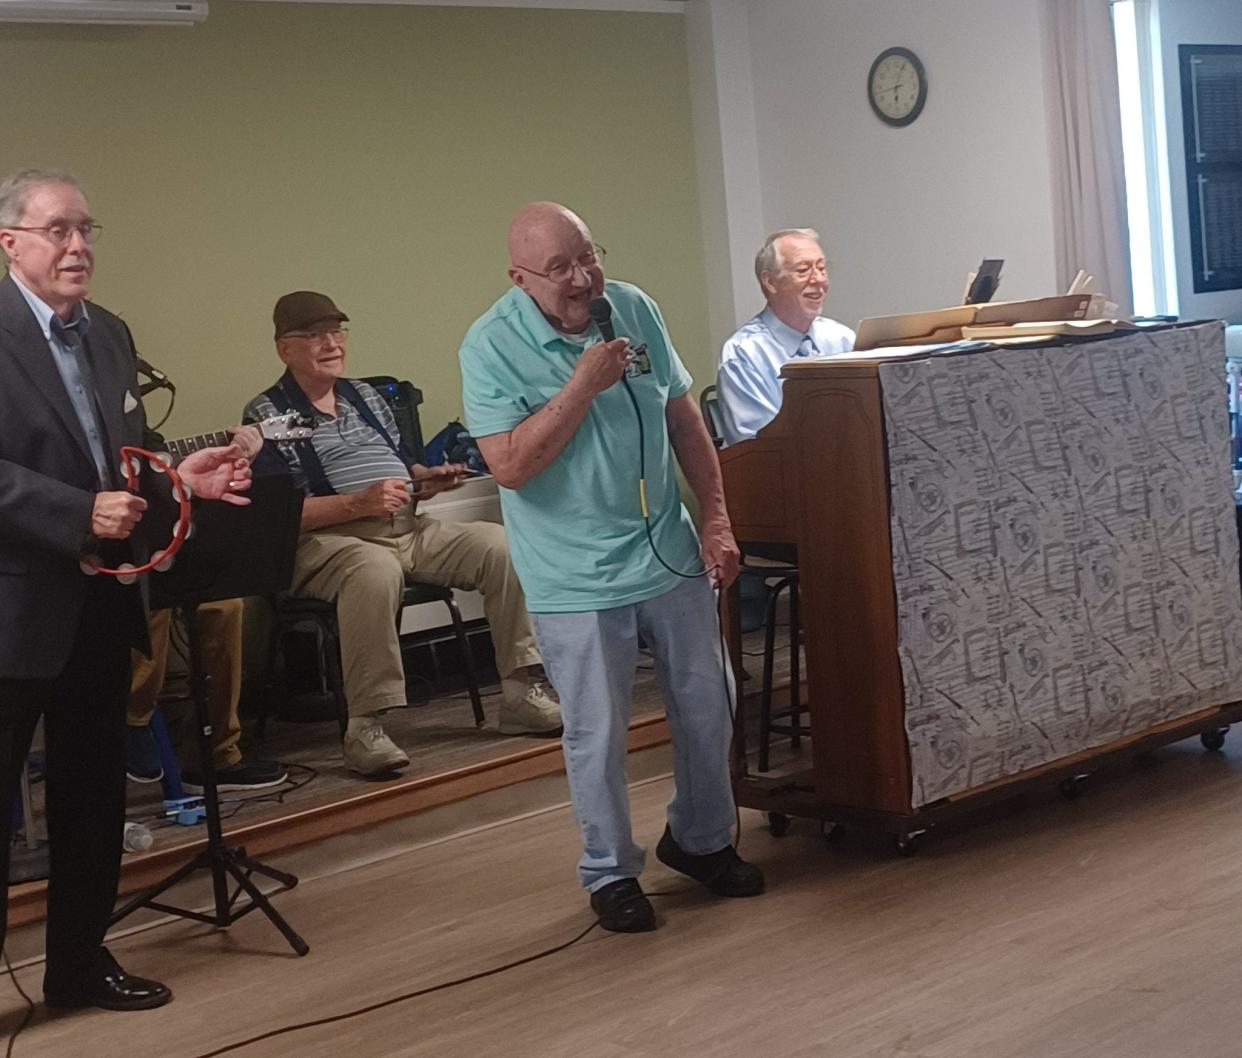 Monroe Center for Healthy Aging members (from left) John Falconer, Dennis Richardville, Harry Redford and Jon Moore sing “L is for the Way You Look at Me" at the center's recent Talent Show.